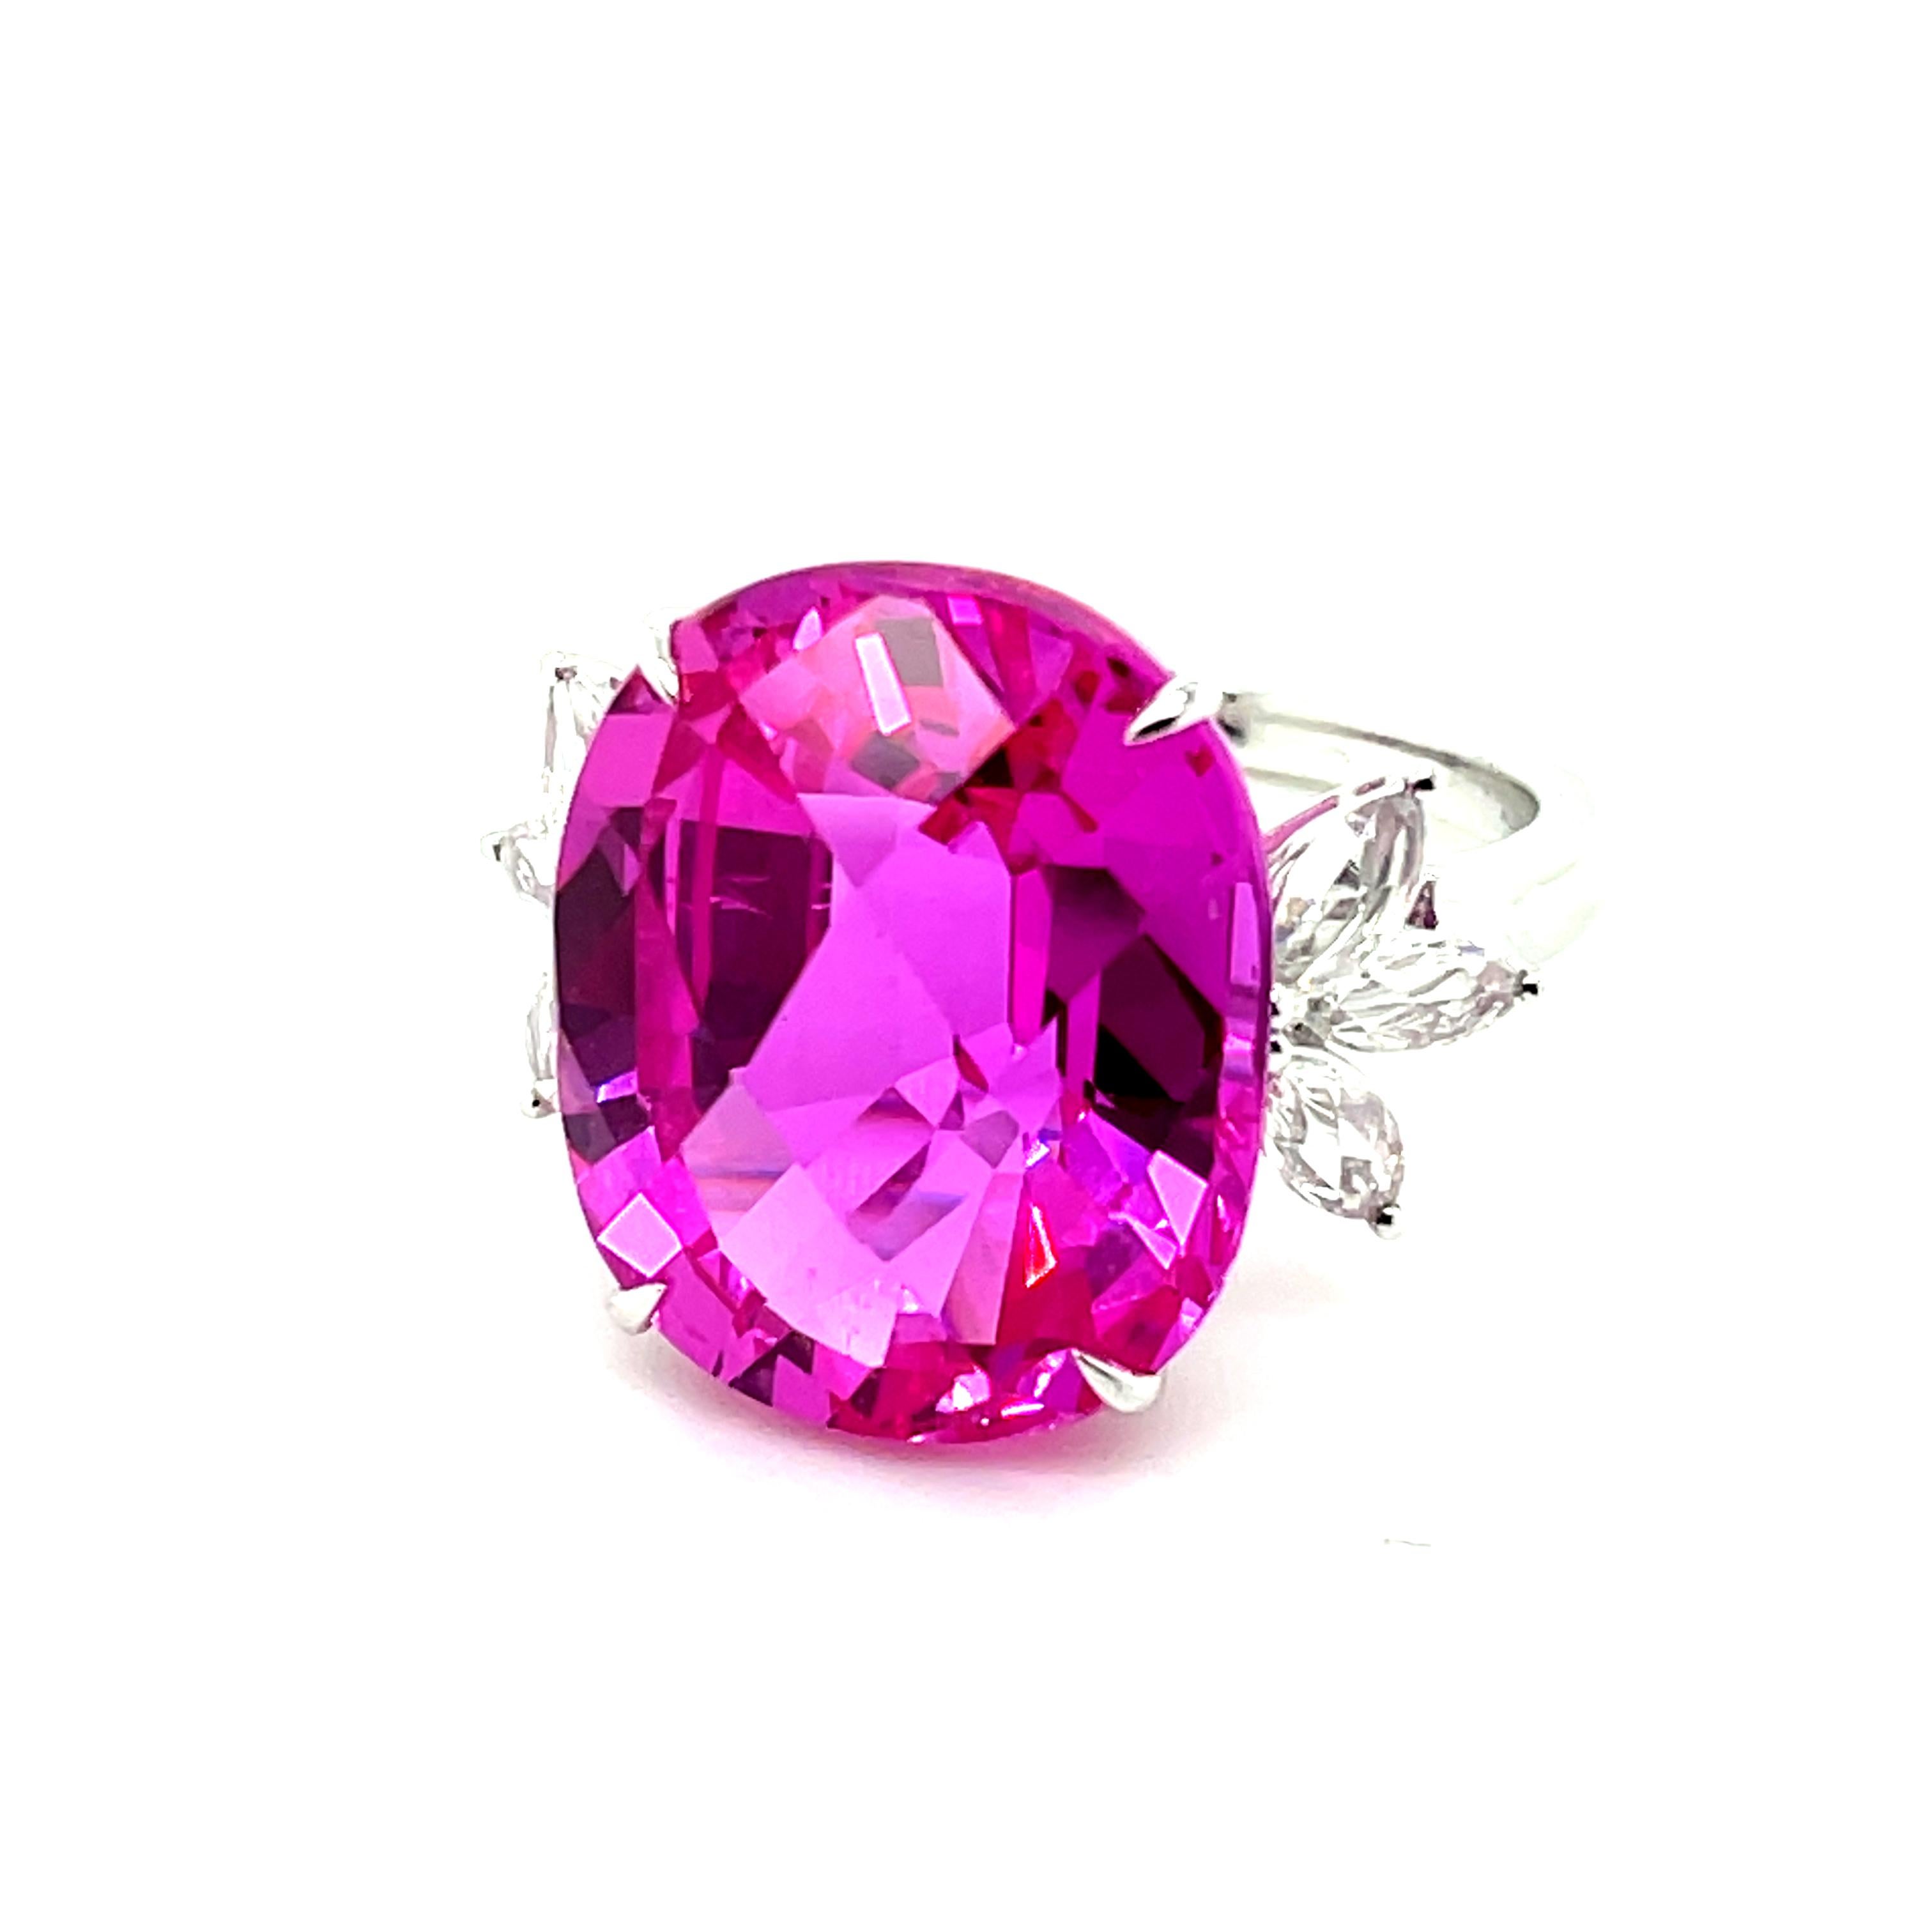 Centering a captivating Pink Topaz, weighing an impressive 20.57 carats, radiating a subtle and charming pink hue that is truly enchanting.

The Pink Topaz is gracefully complemented by a symmetrical arrangement.

It is shouldered by six Marquise